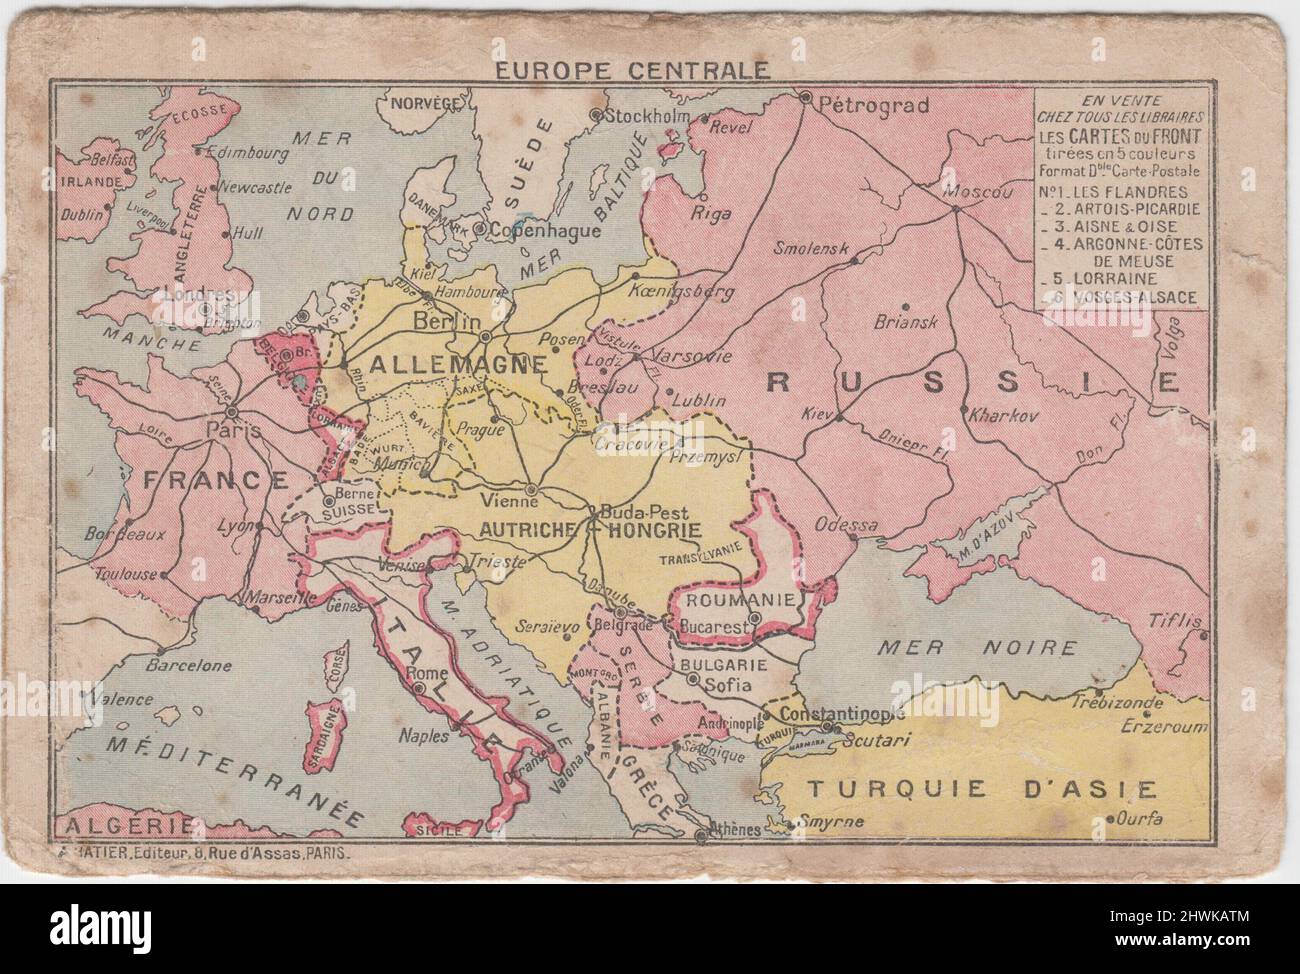 Europe Centrale / Central Europe: First World War map showing the borders of combatant countries. The map was included on the front of a French Army letter card Stock Photo